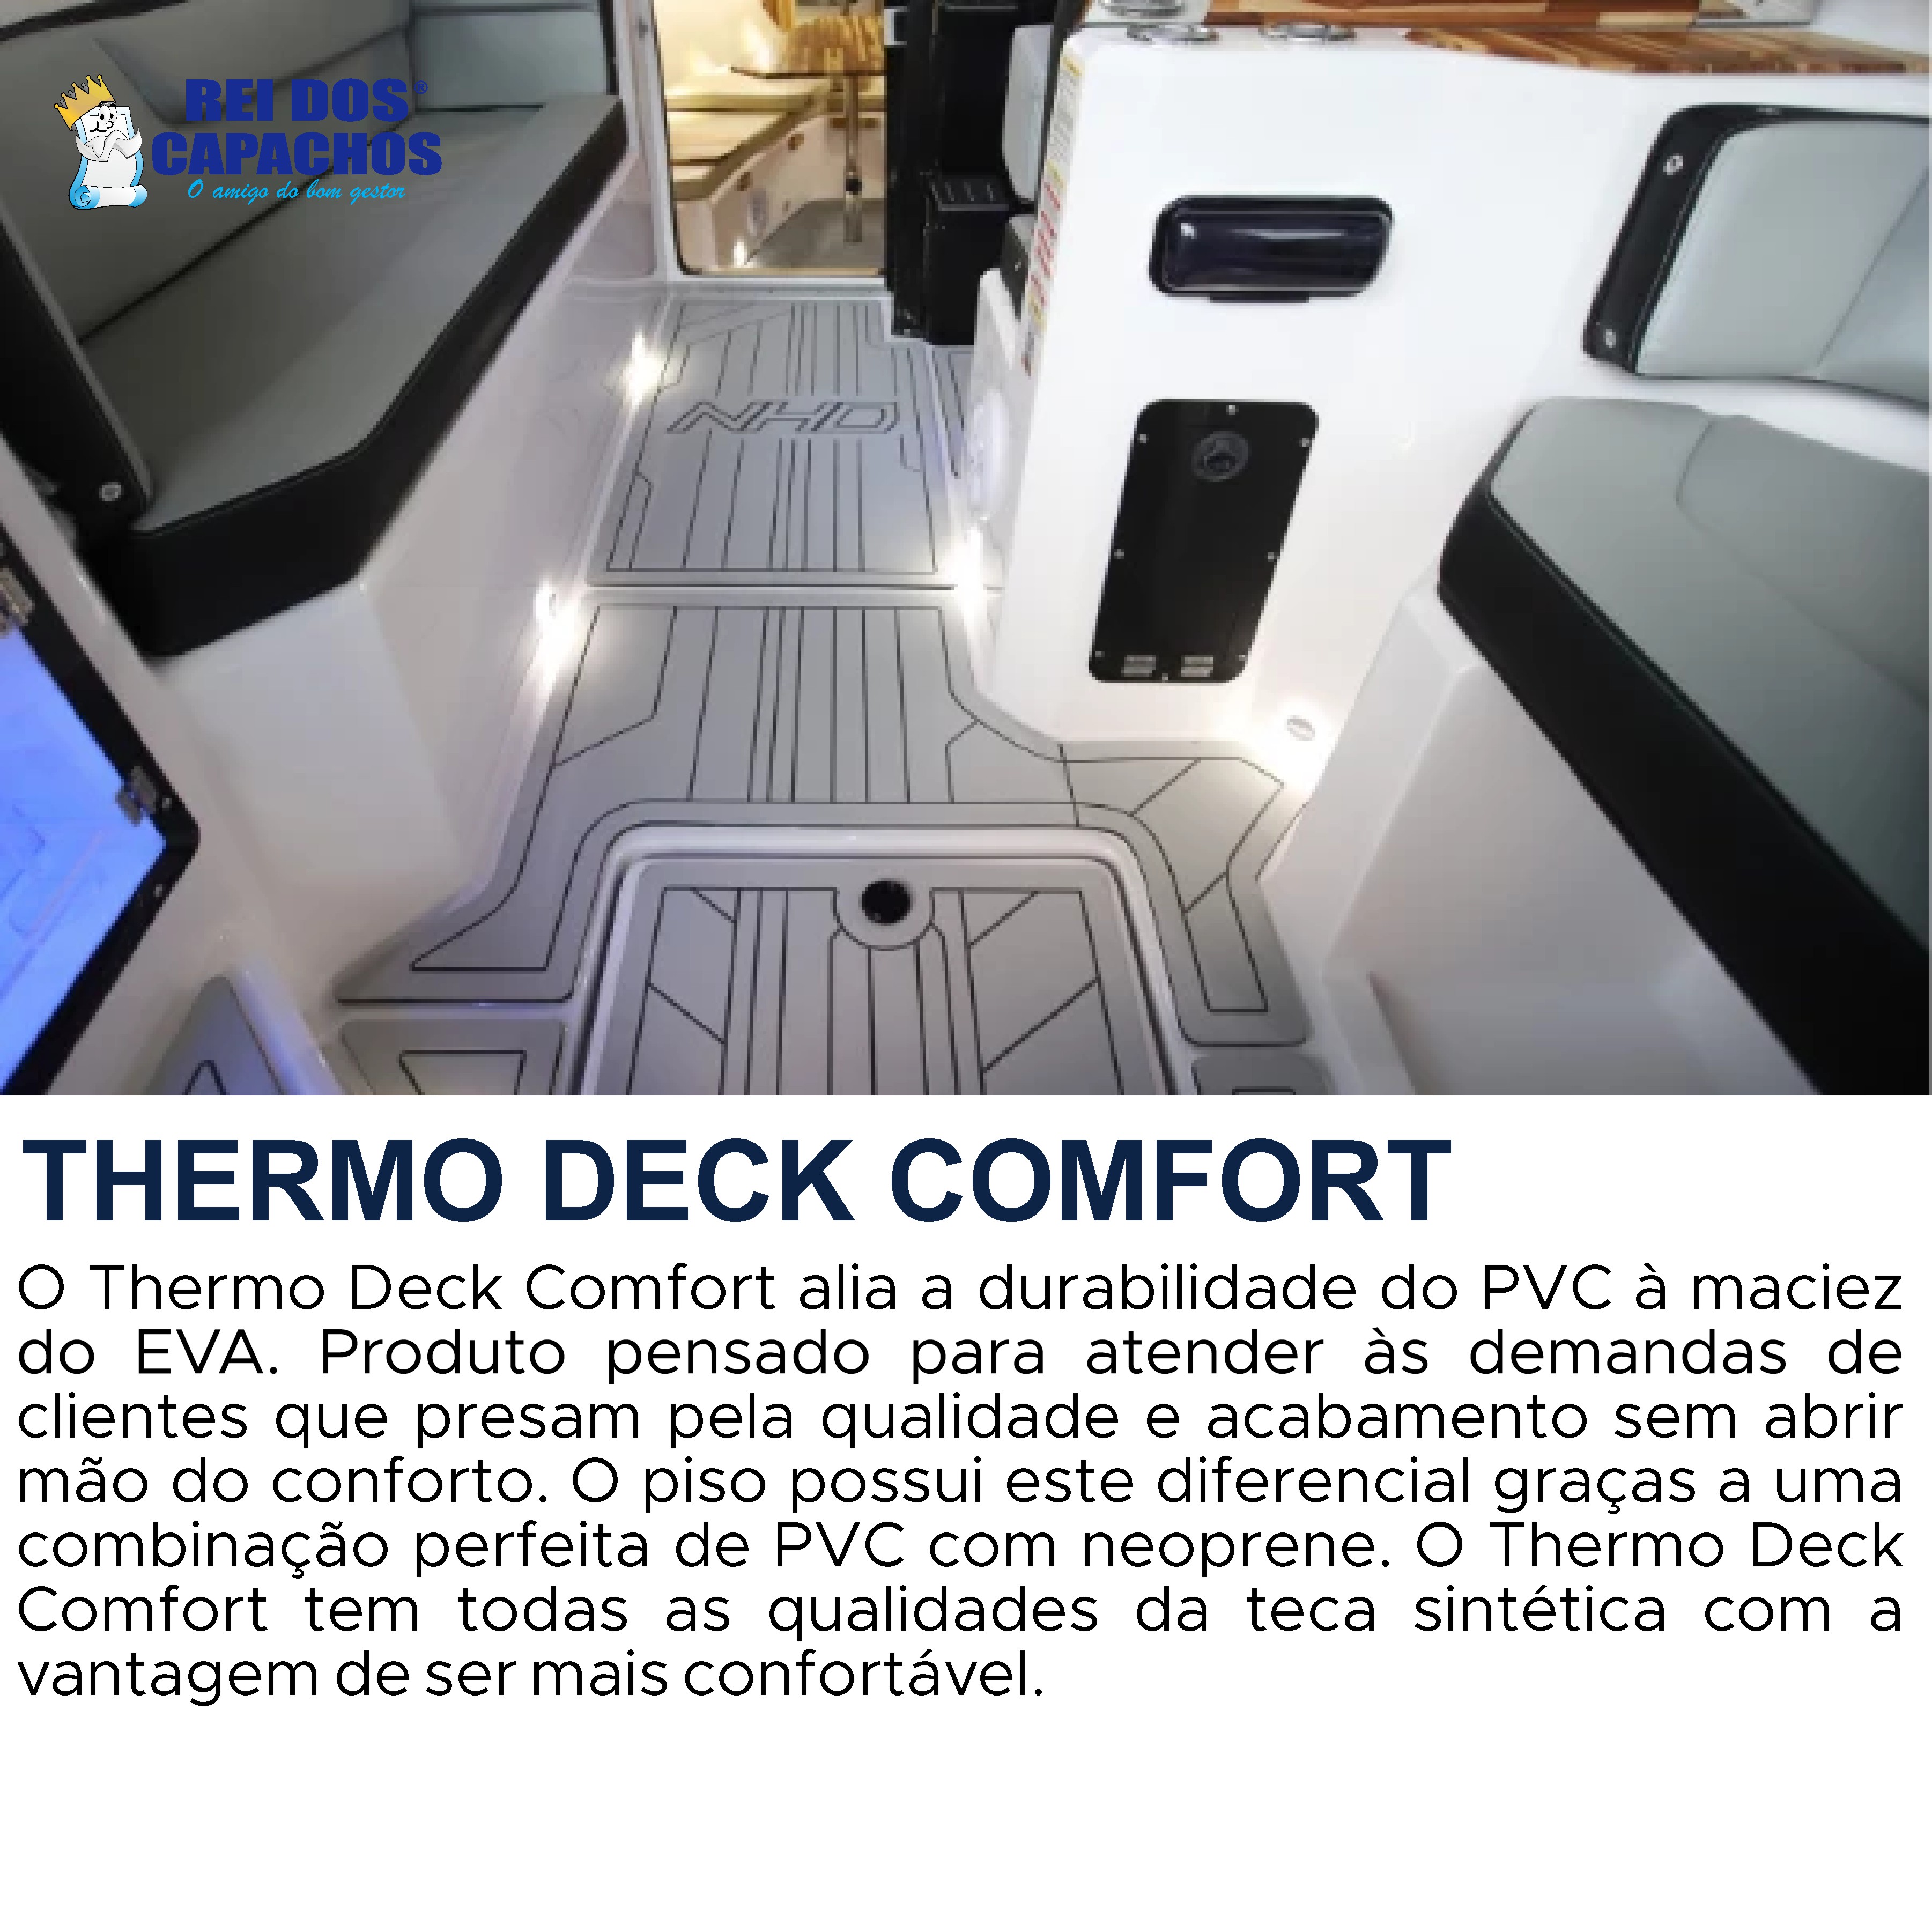 TAPETE PVC THERMO DECK COMFORT PARA ECOMARINER 45 - CABINE